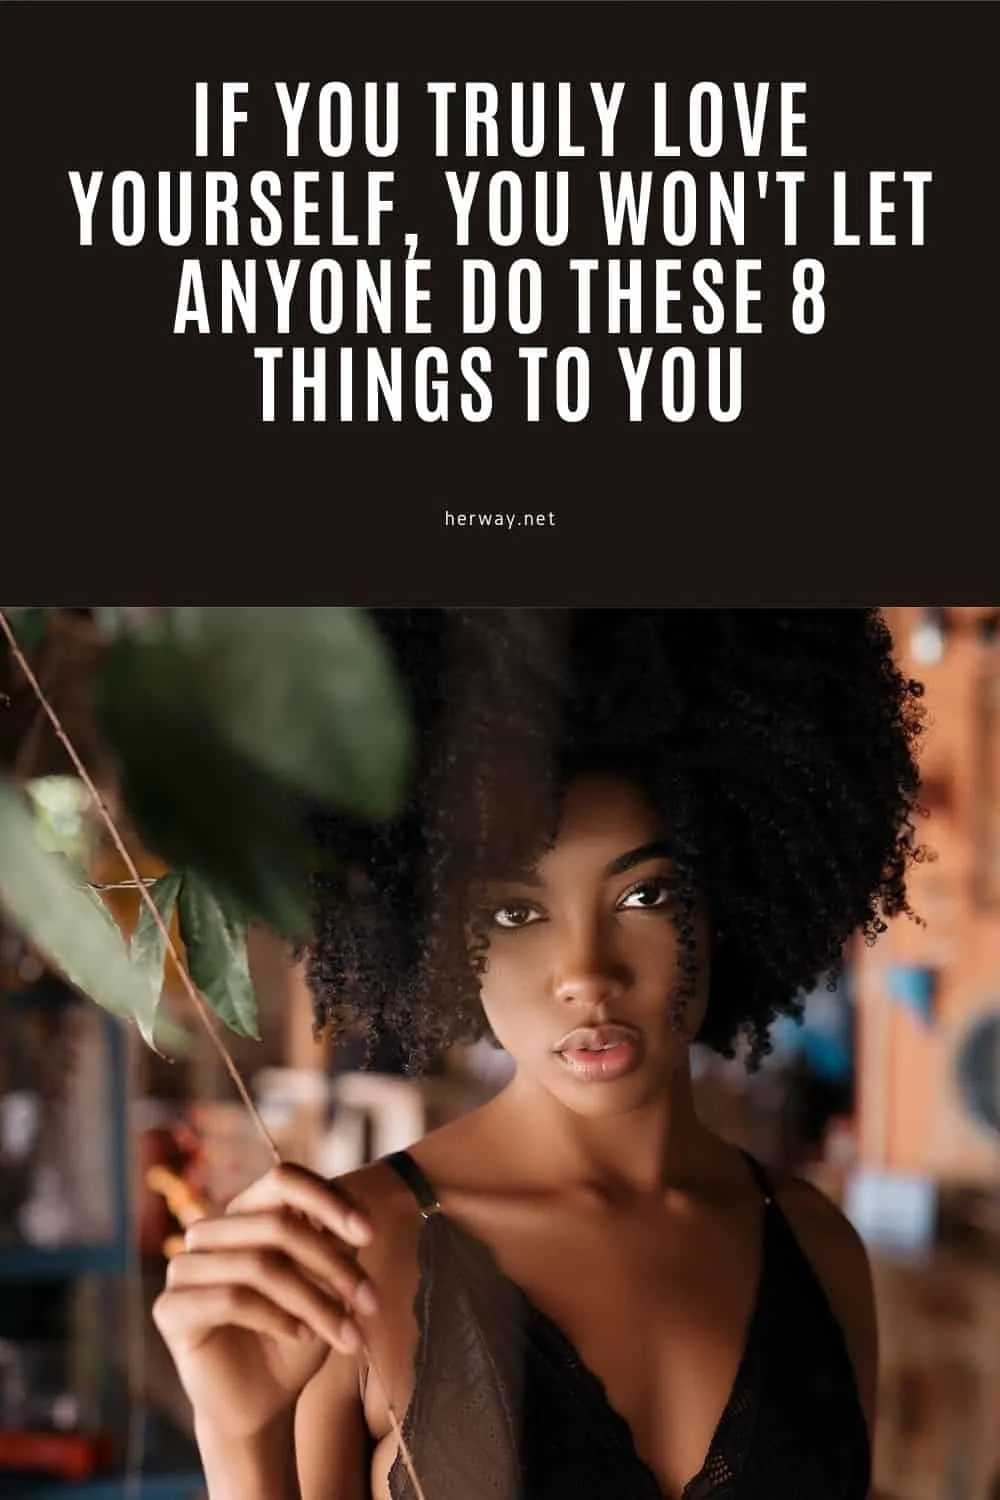 If You Truly Love Yourself, You Won't Let Anyone Do These 8 Things To You